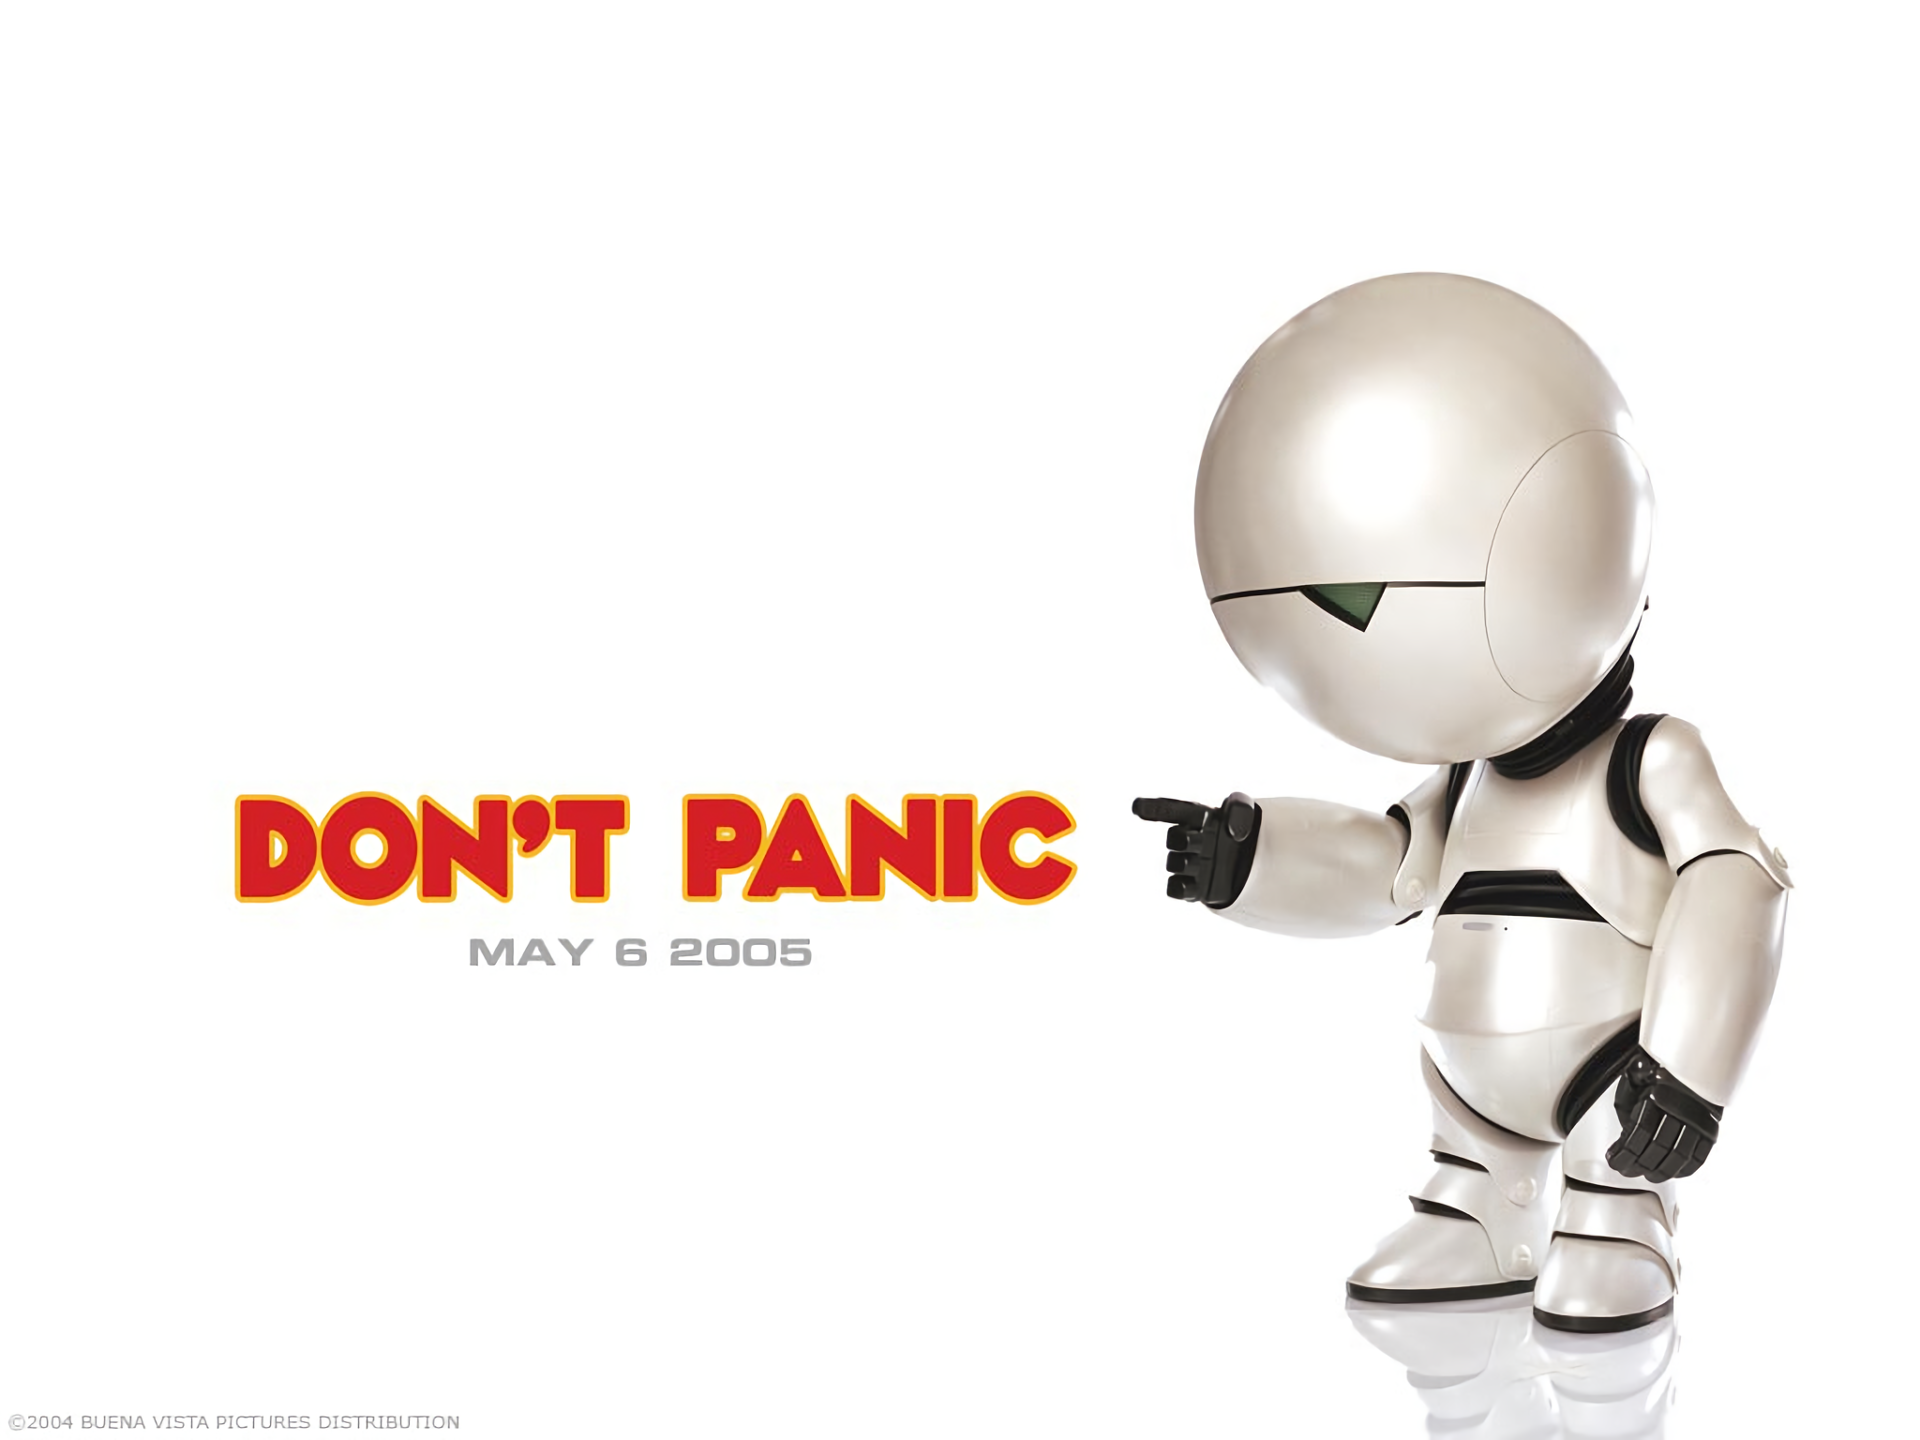 Marvin, the depressed robot from The Hitchhiker's Guide to the Galaxy, on a HD desktop wallpaper.